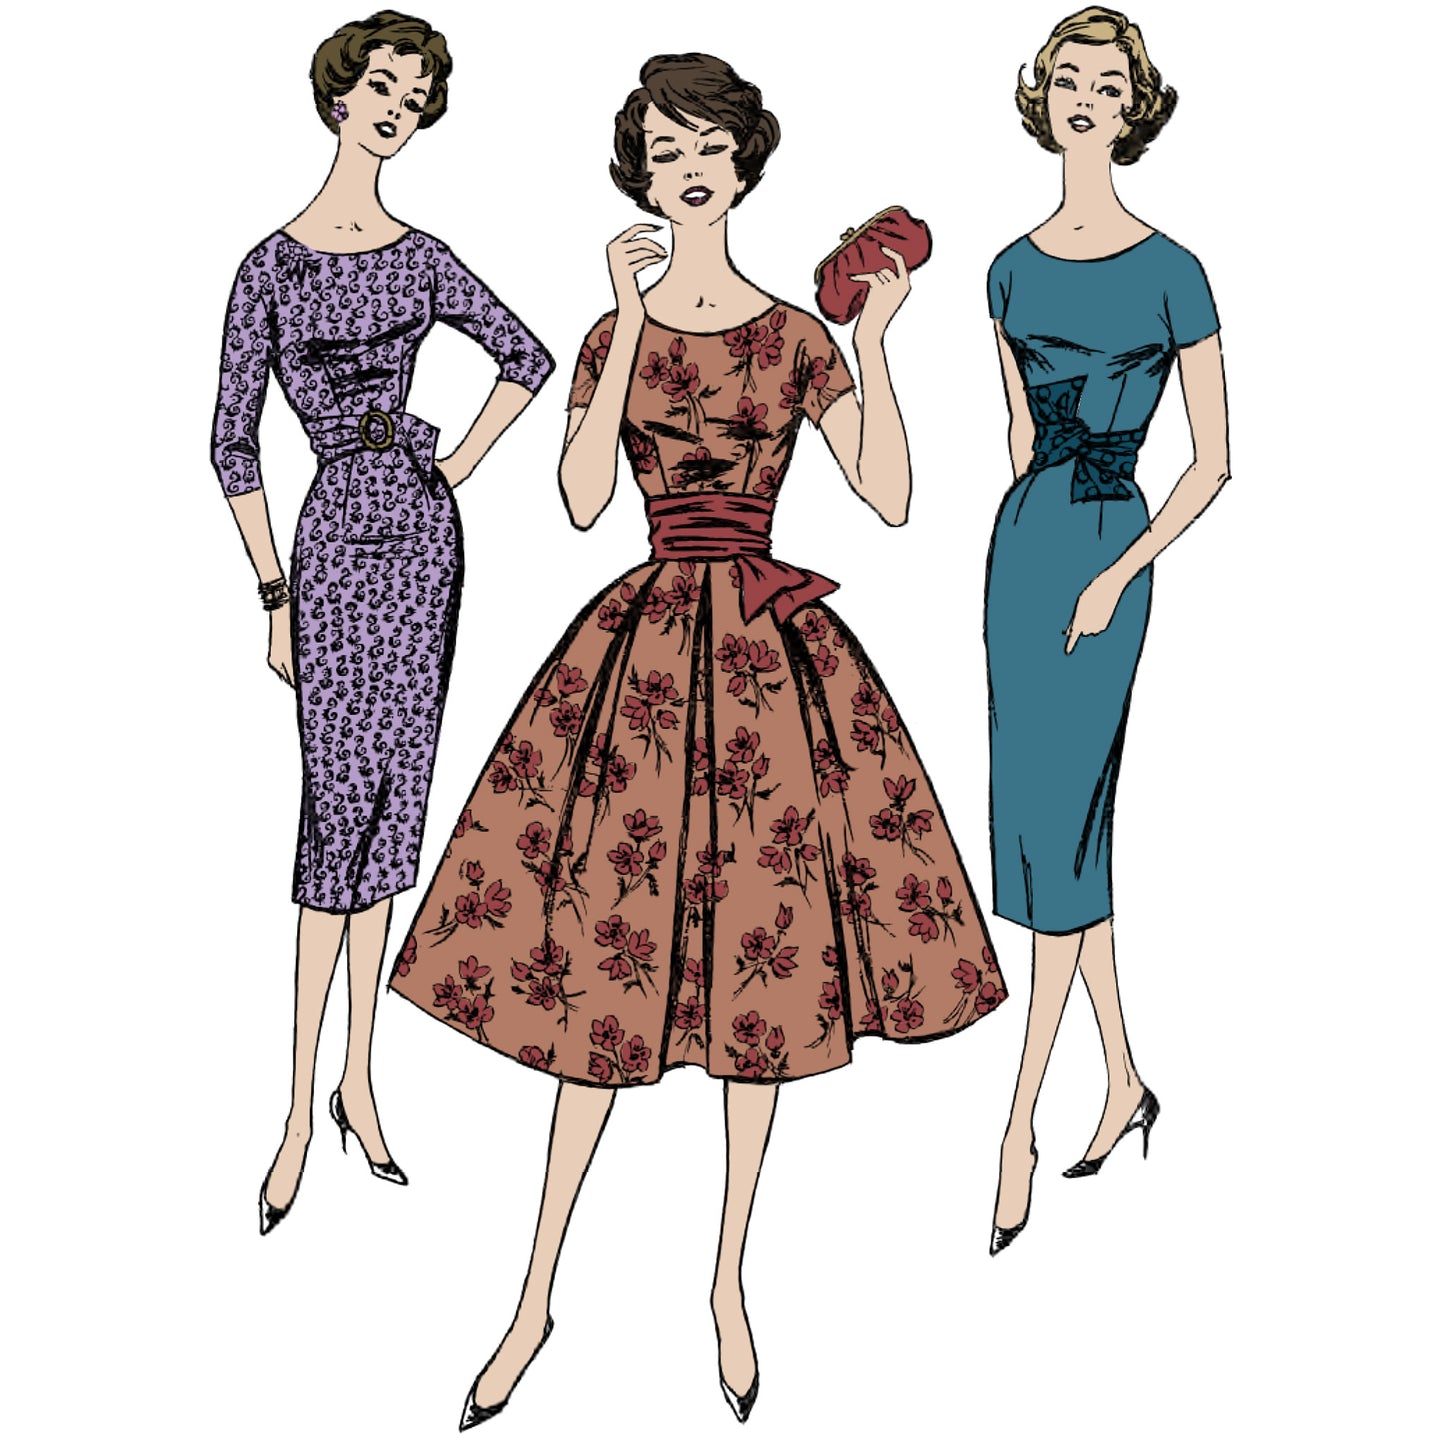 3 women wearing 3 different versions of the same dress featuring short or three quater length sleeves. Dart fitted bodice and full pleated or fitted skirt. Back zip closure and cummerbung or belt.